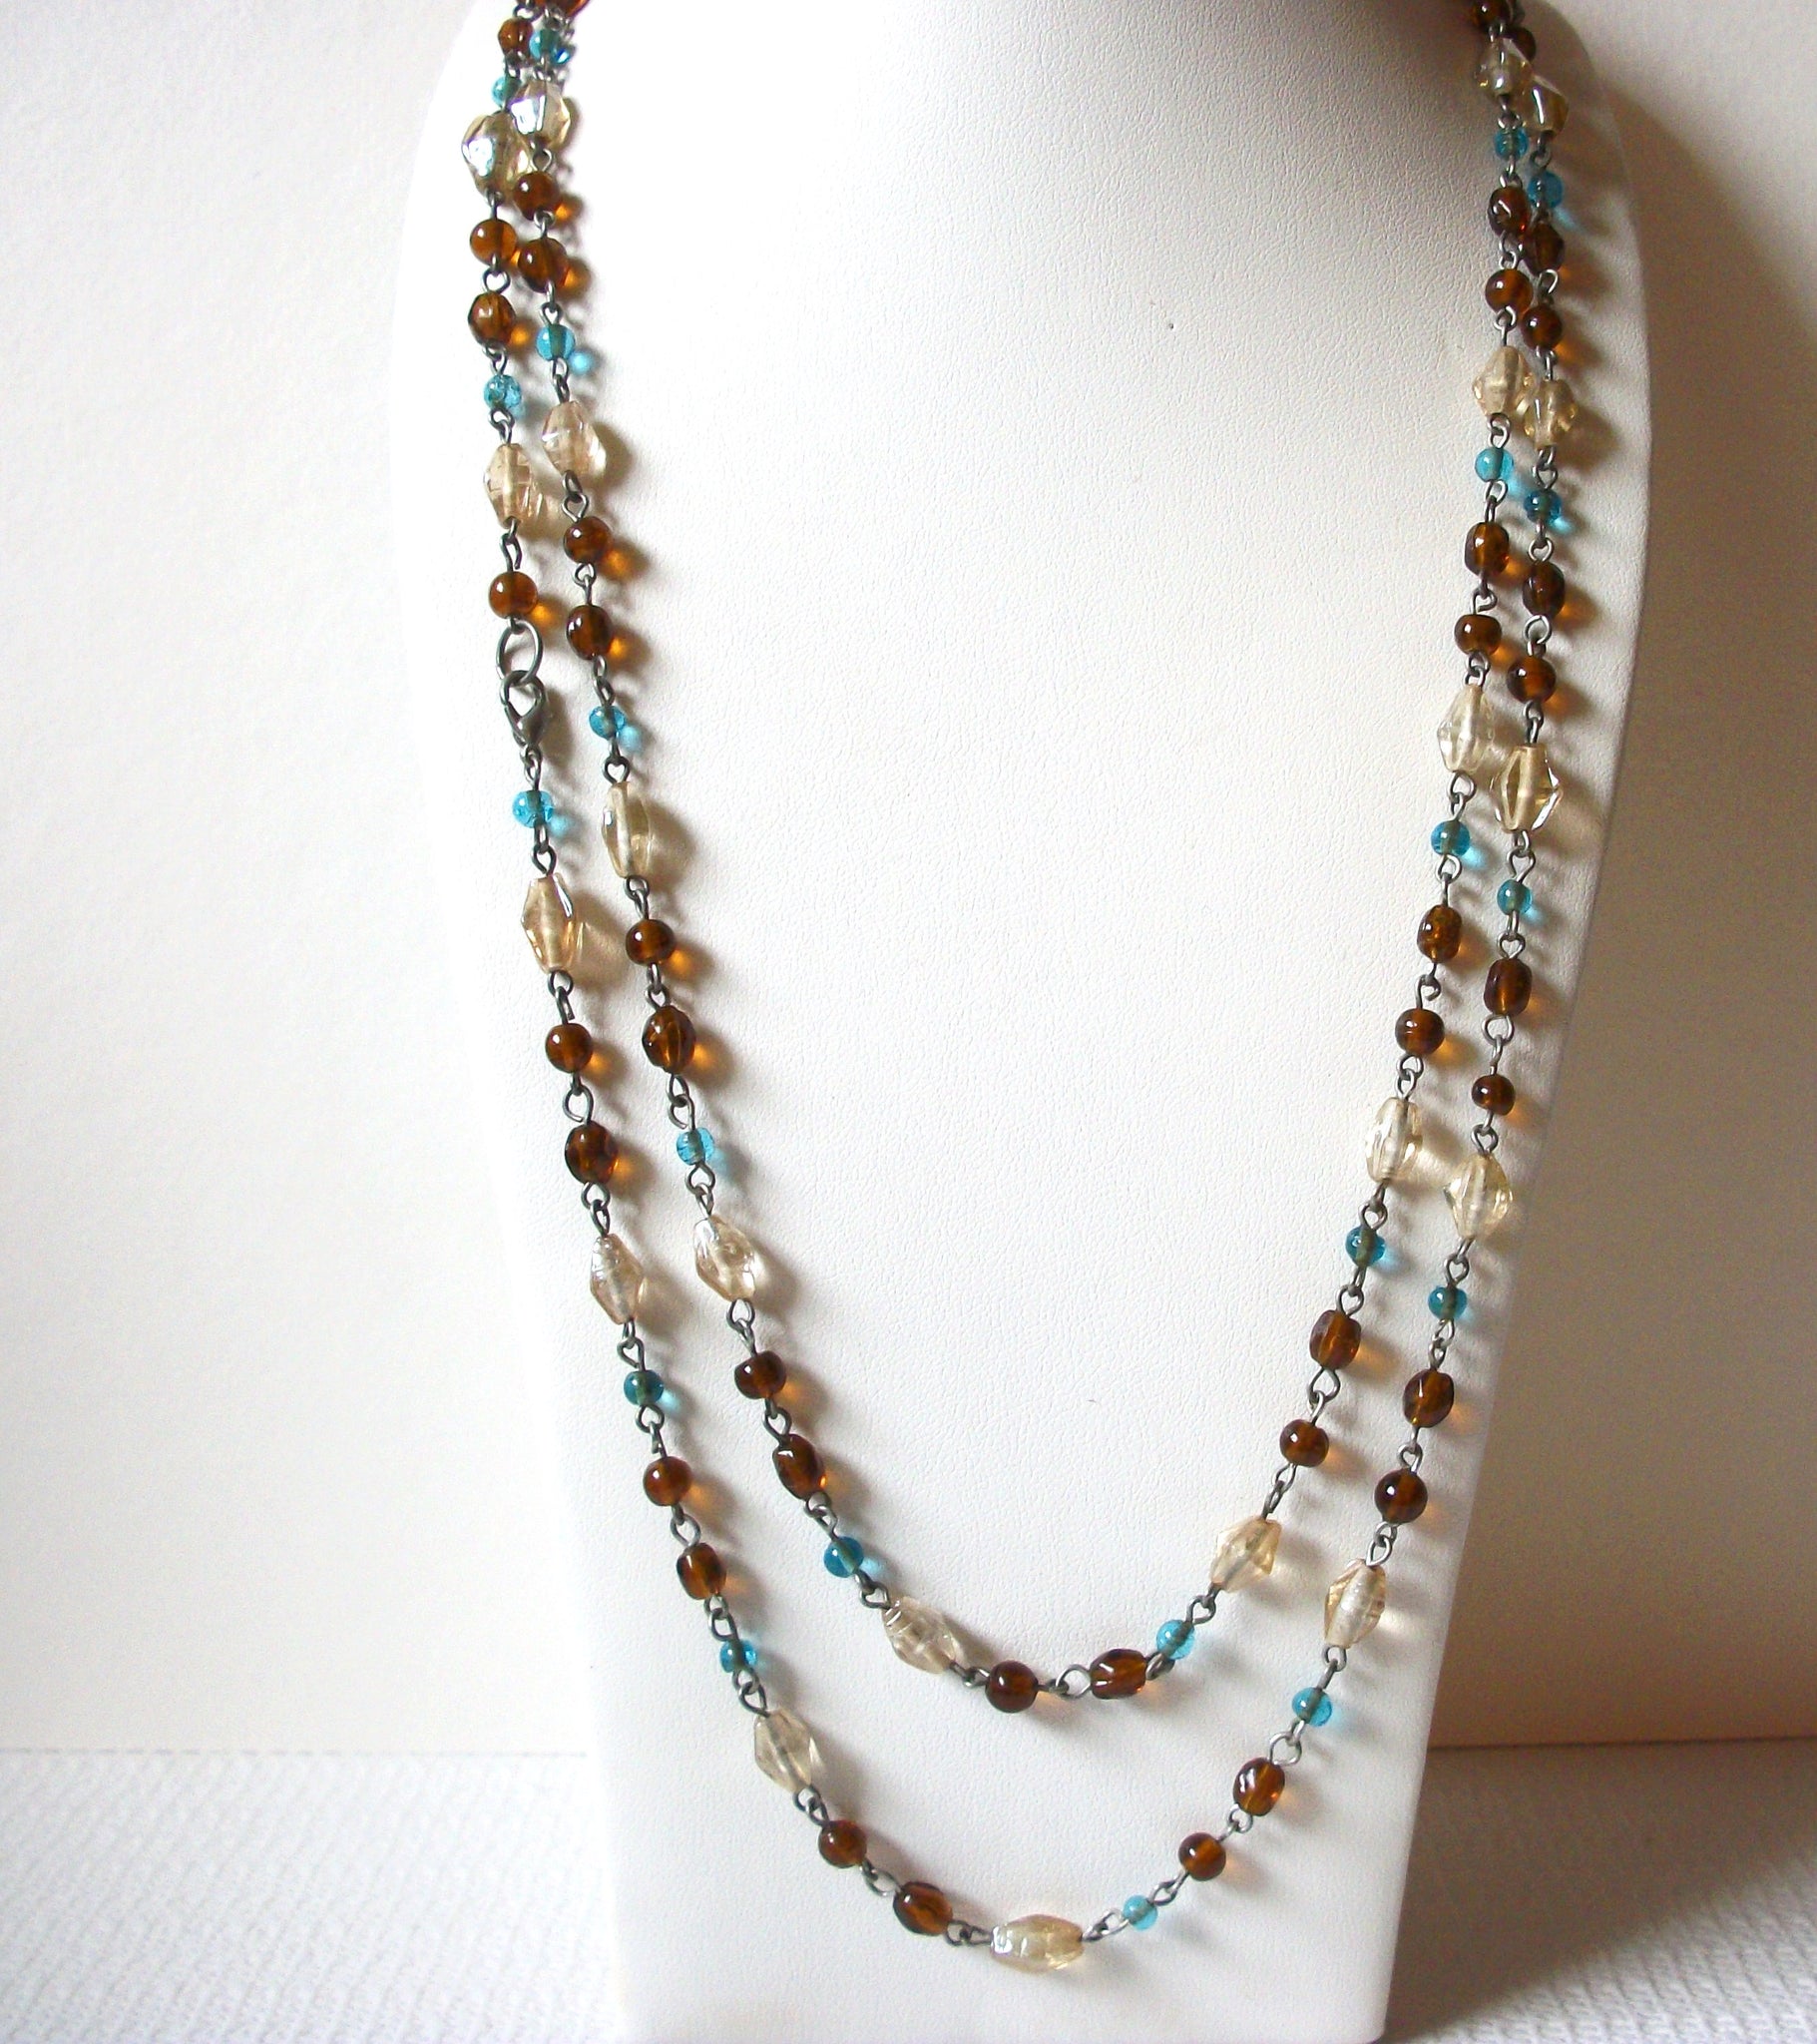 Vintage Glass Beads Necklace 81220